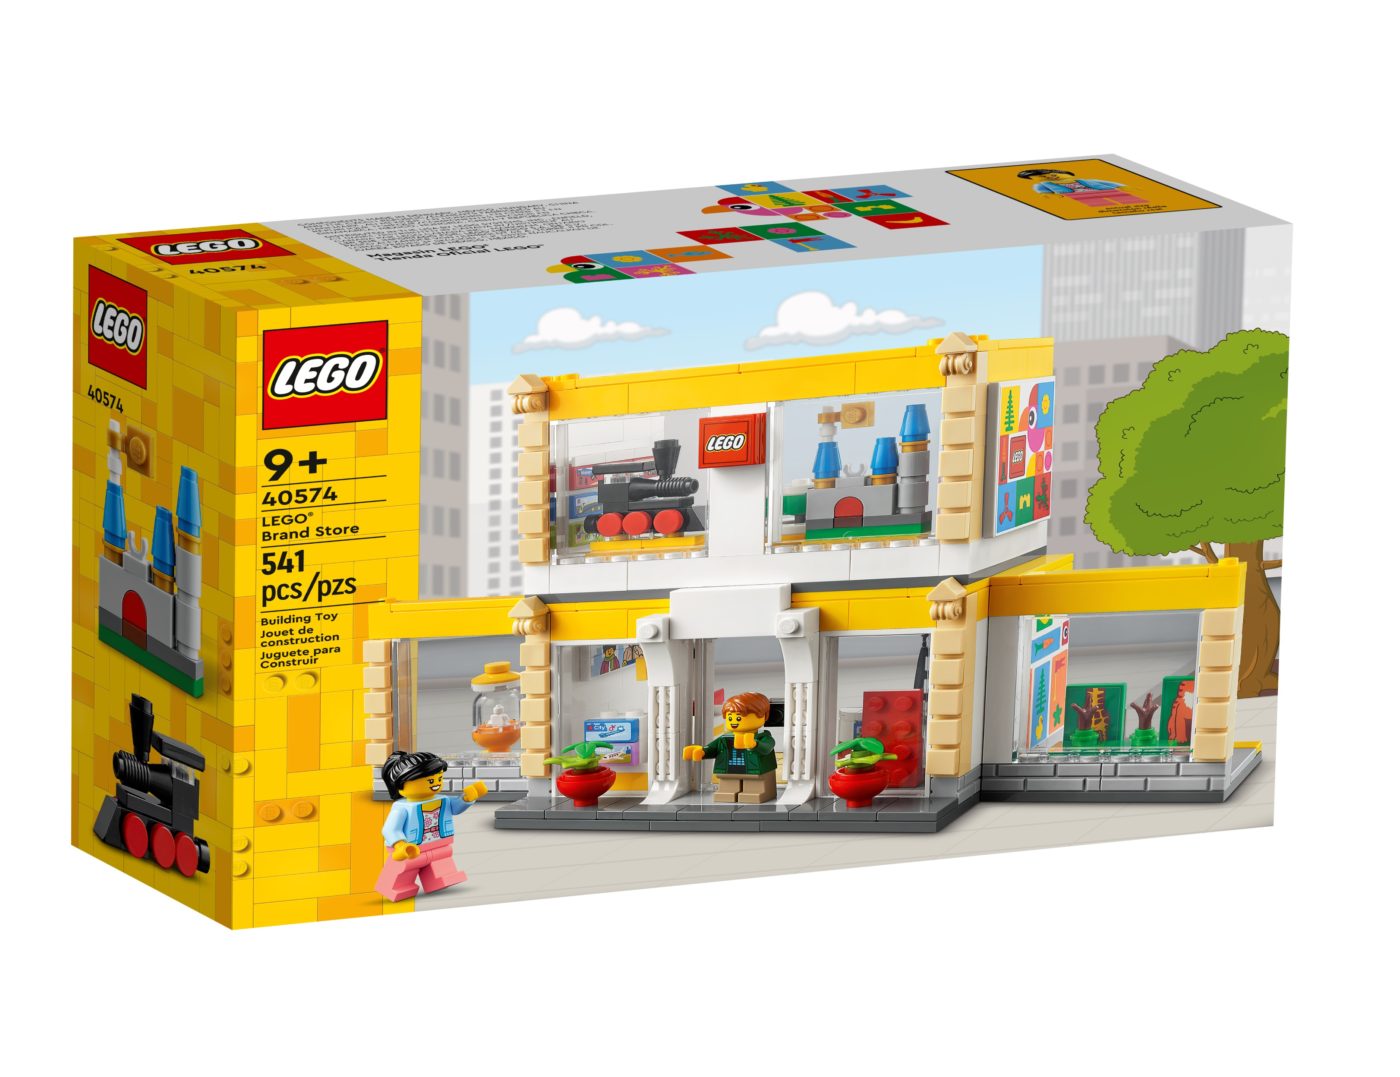 40574 LEGO Store is a newly updated buildable LEGO store for 2022 that everyone buy! - Jay's Brick Blog